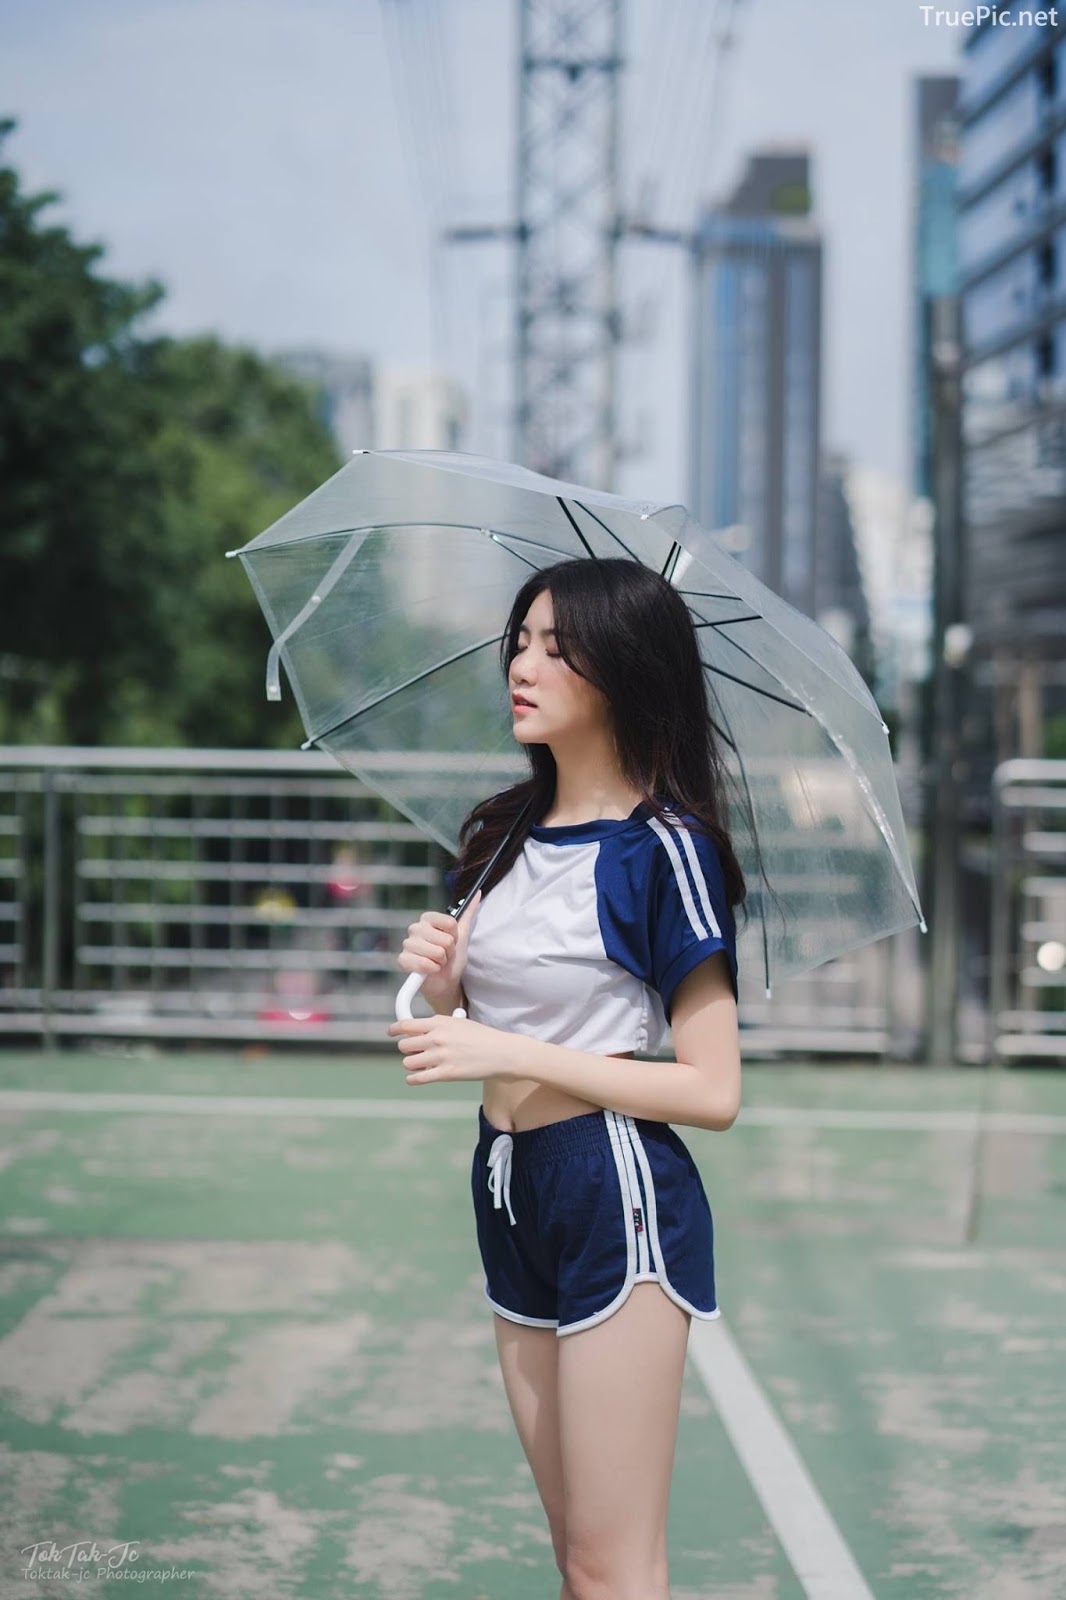 Hot Girl Thailand - Sasi Ngiunwan - Scenes From an Empty City - TruePic.net - Picture 39